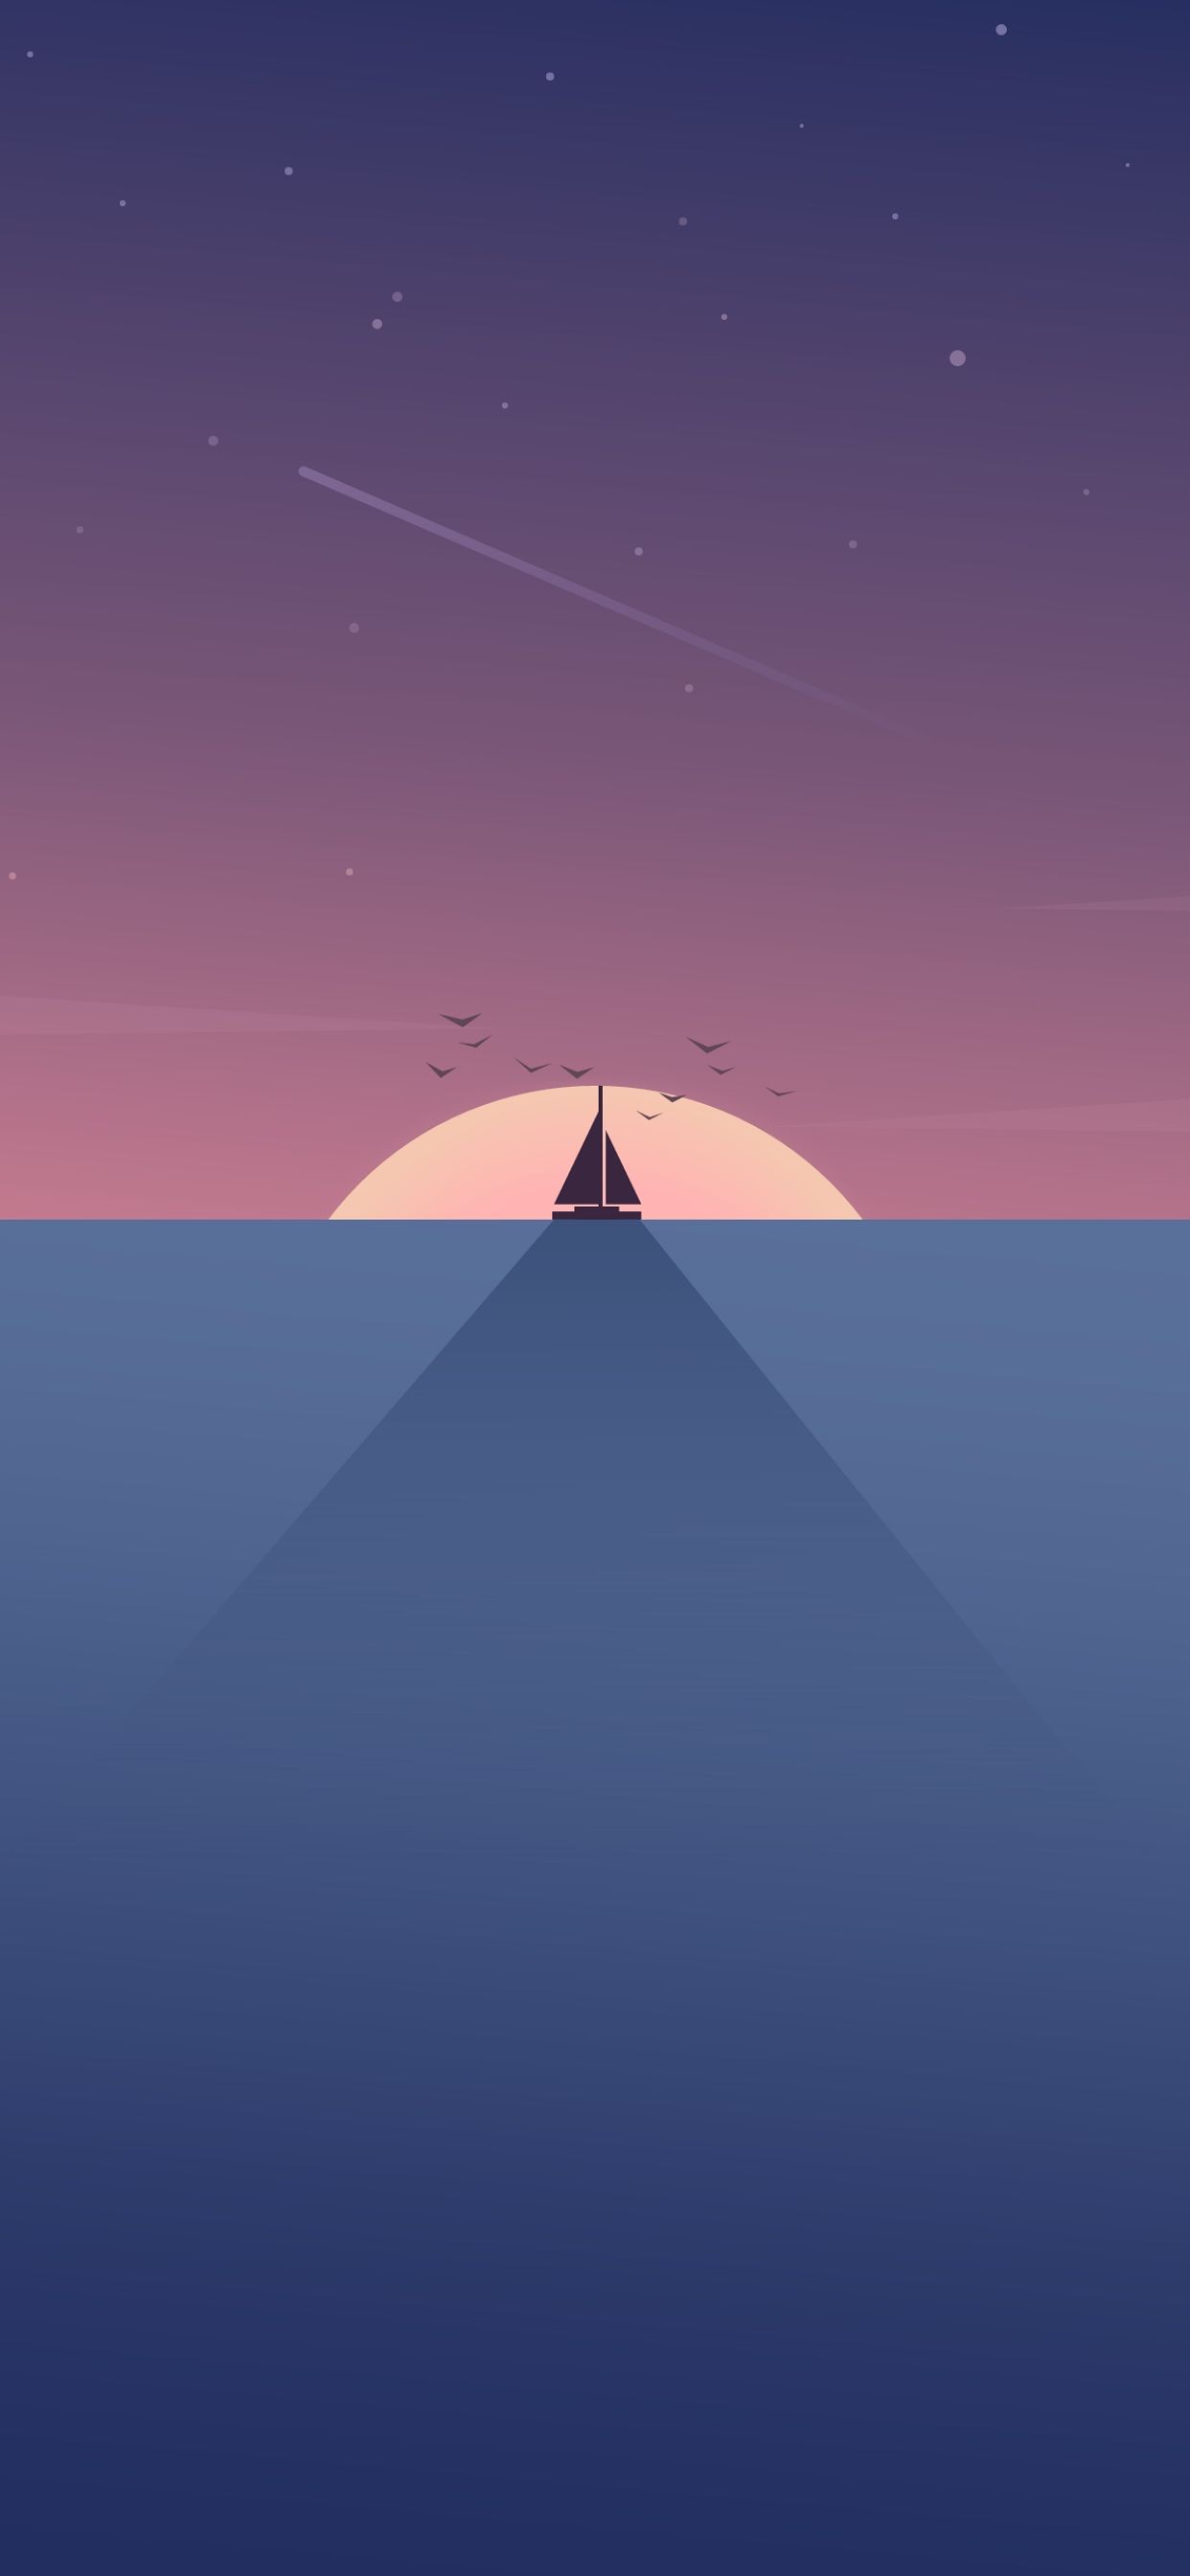 A minimalist wallpaper of a boat sailing in the ocean during sunset - VHS